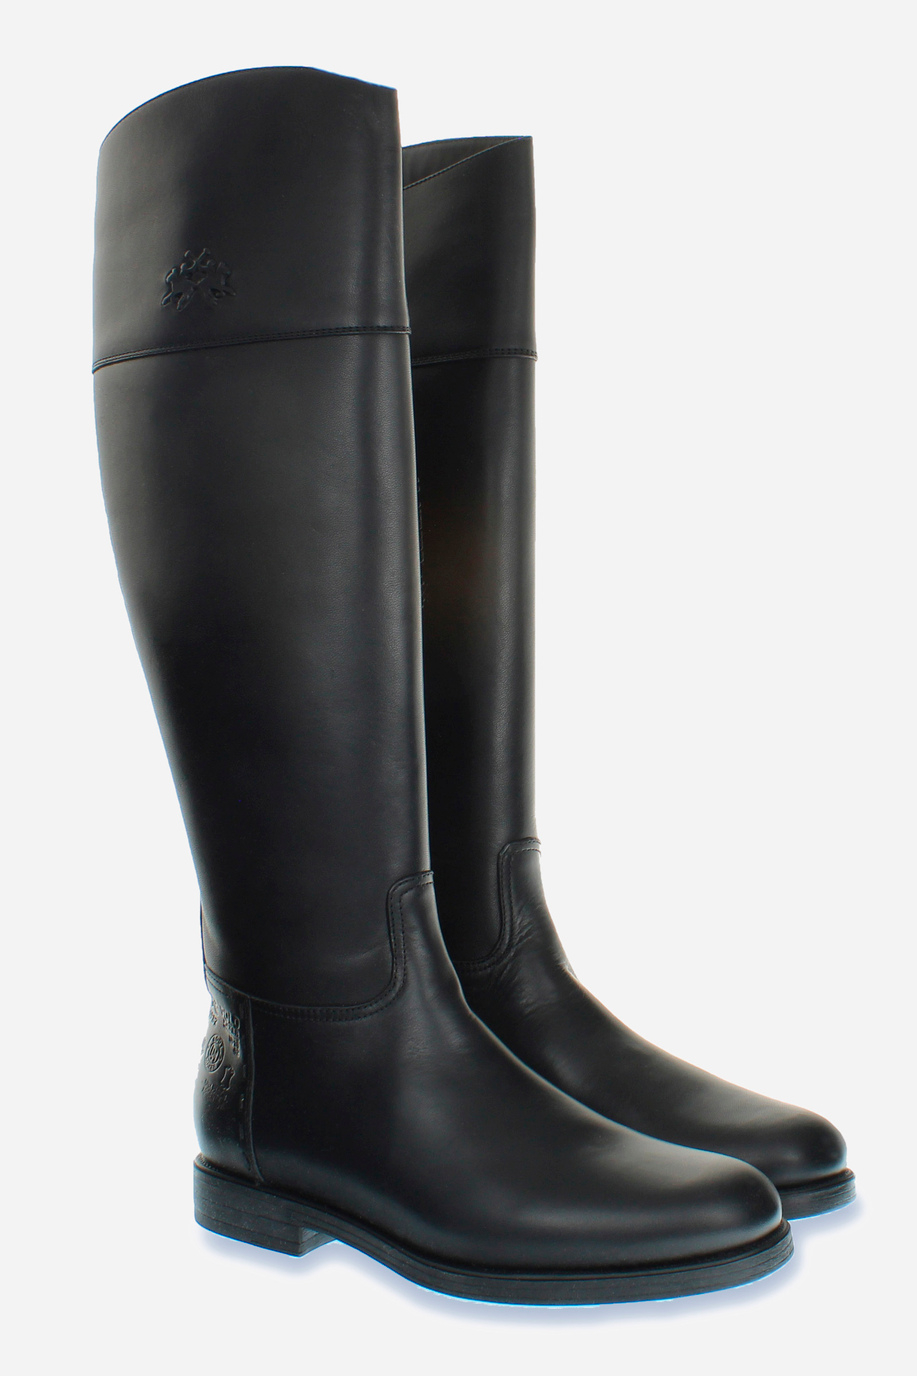 Women’s equestrian style leather boot - Footwear | La Martina - Official Online Shop